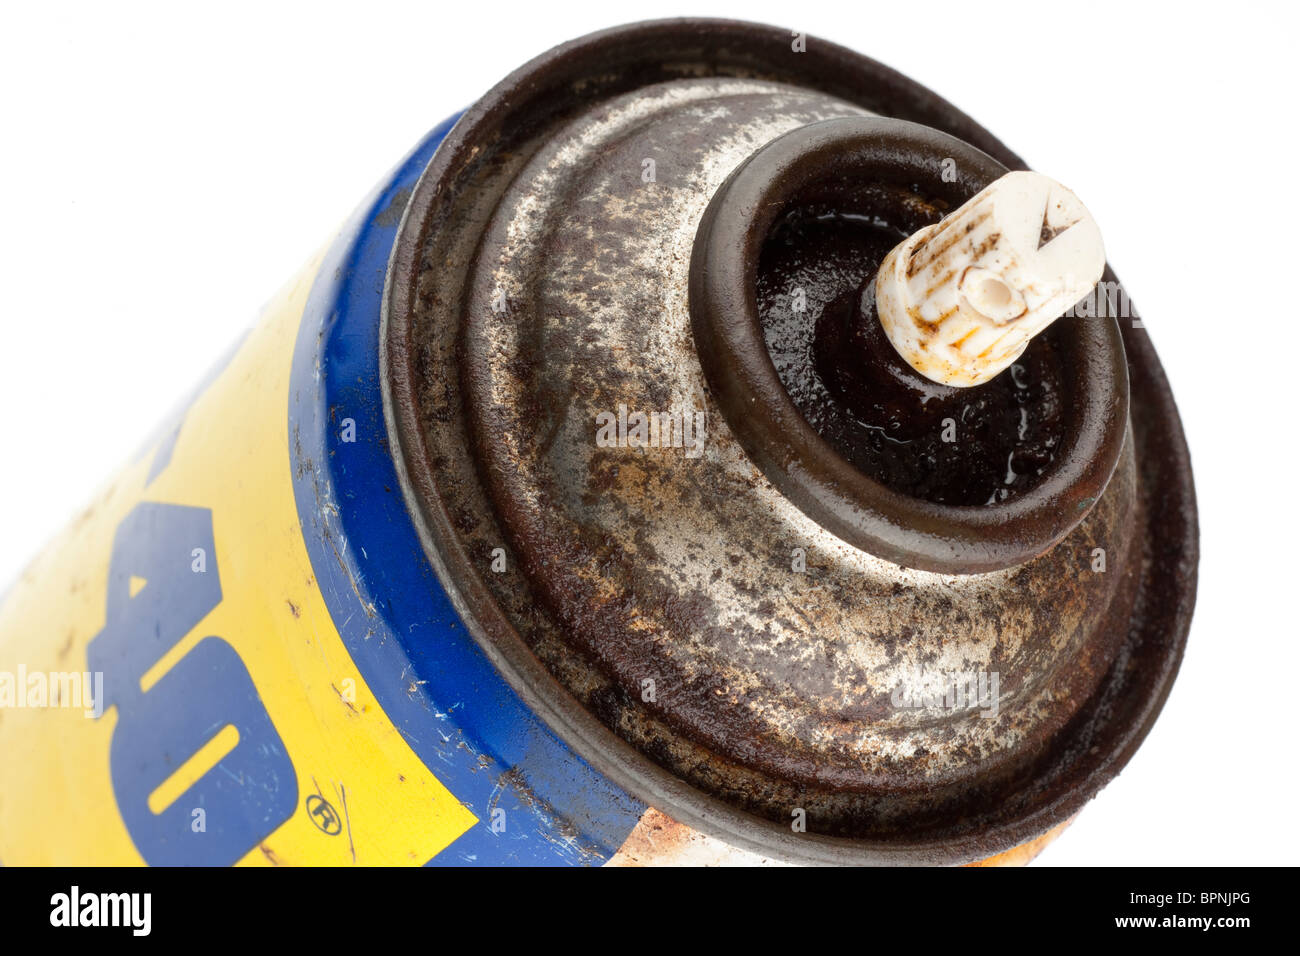 Old spray can of lubrication fluid Stock Photo